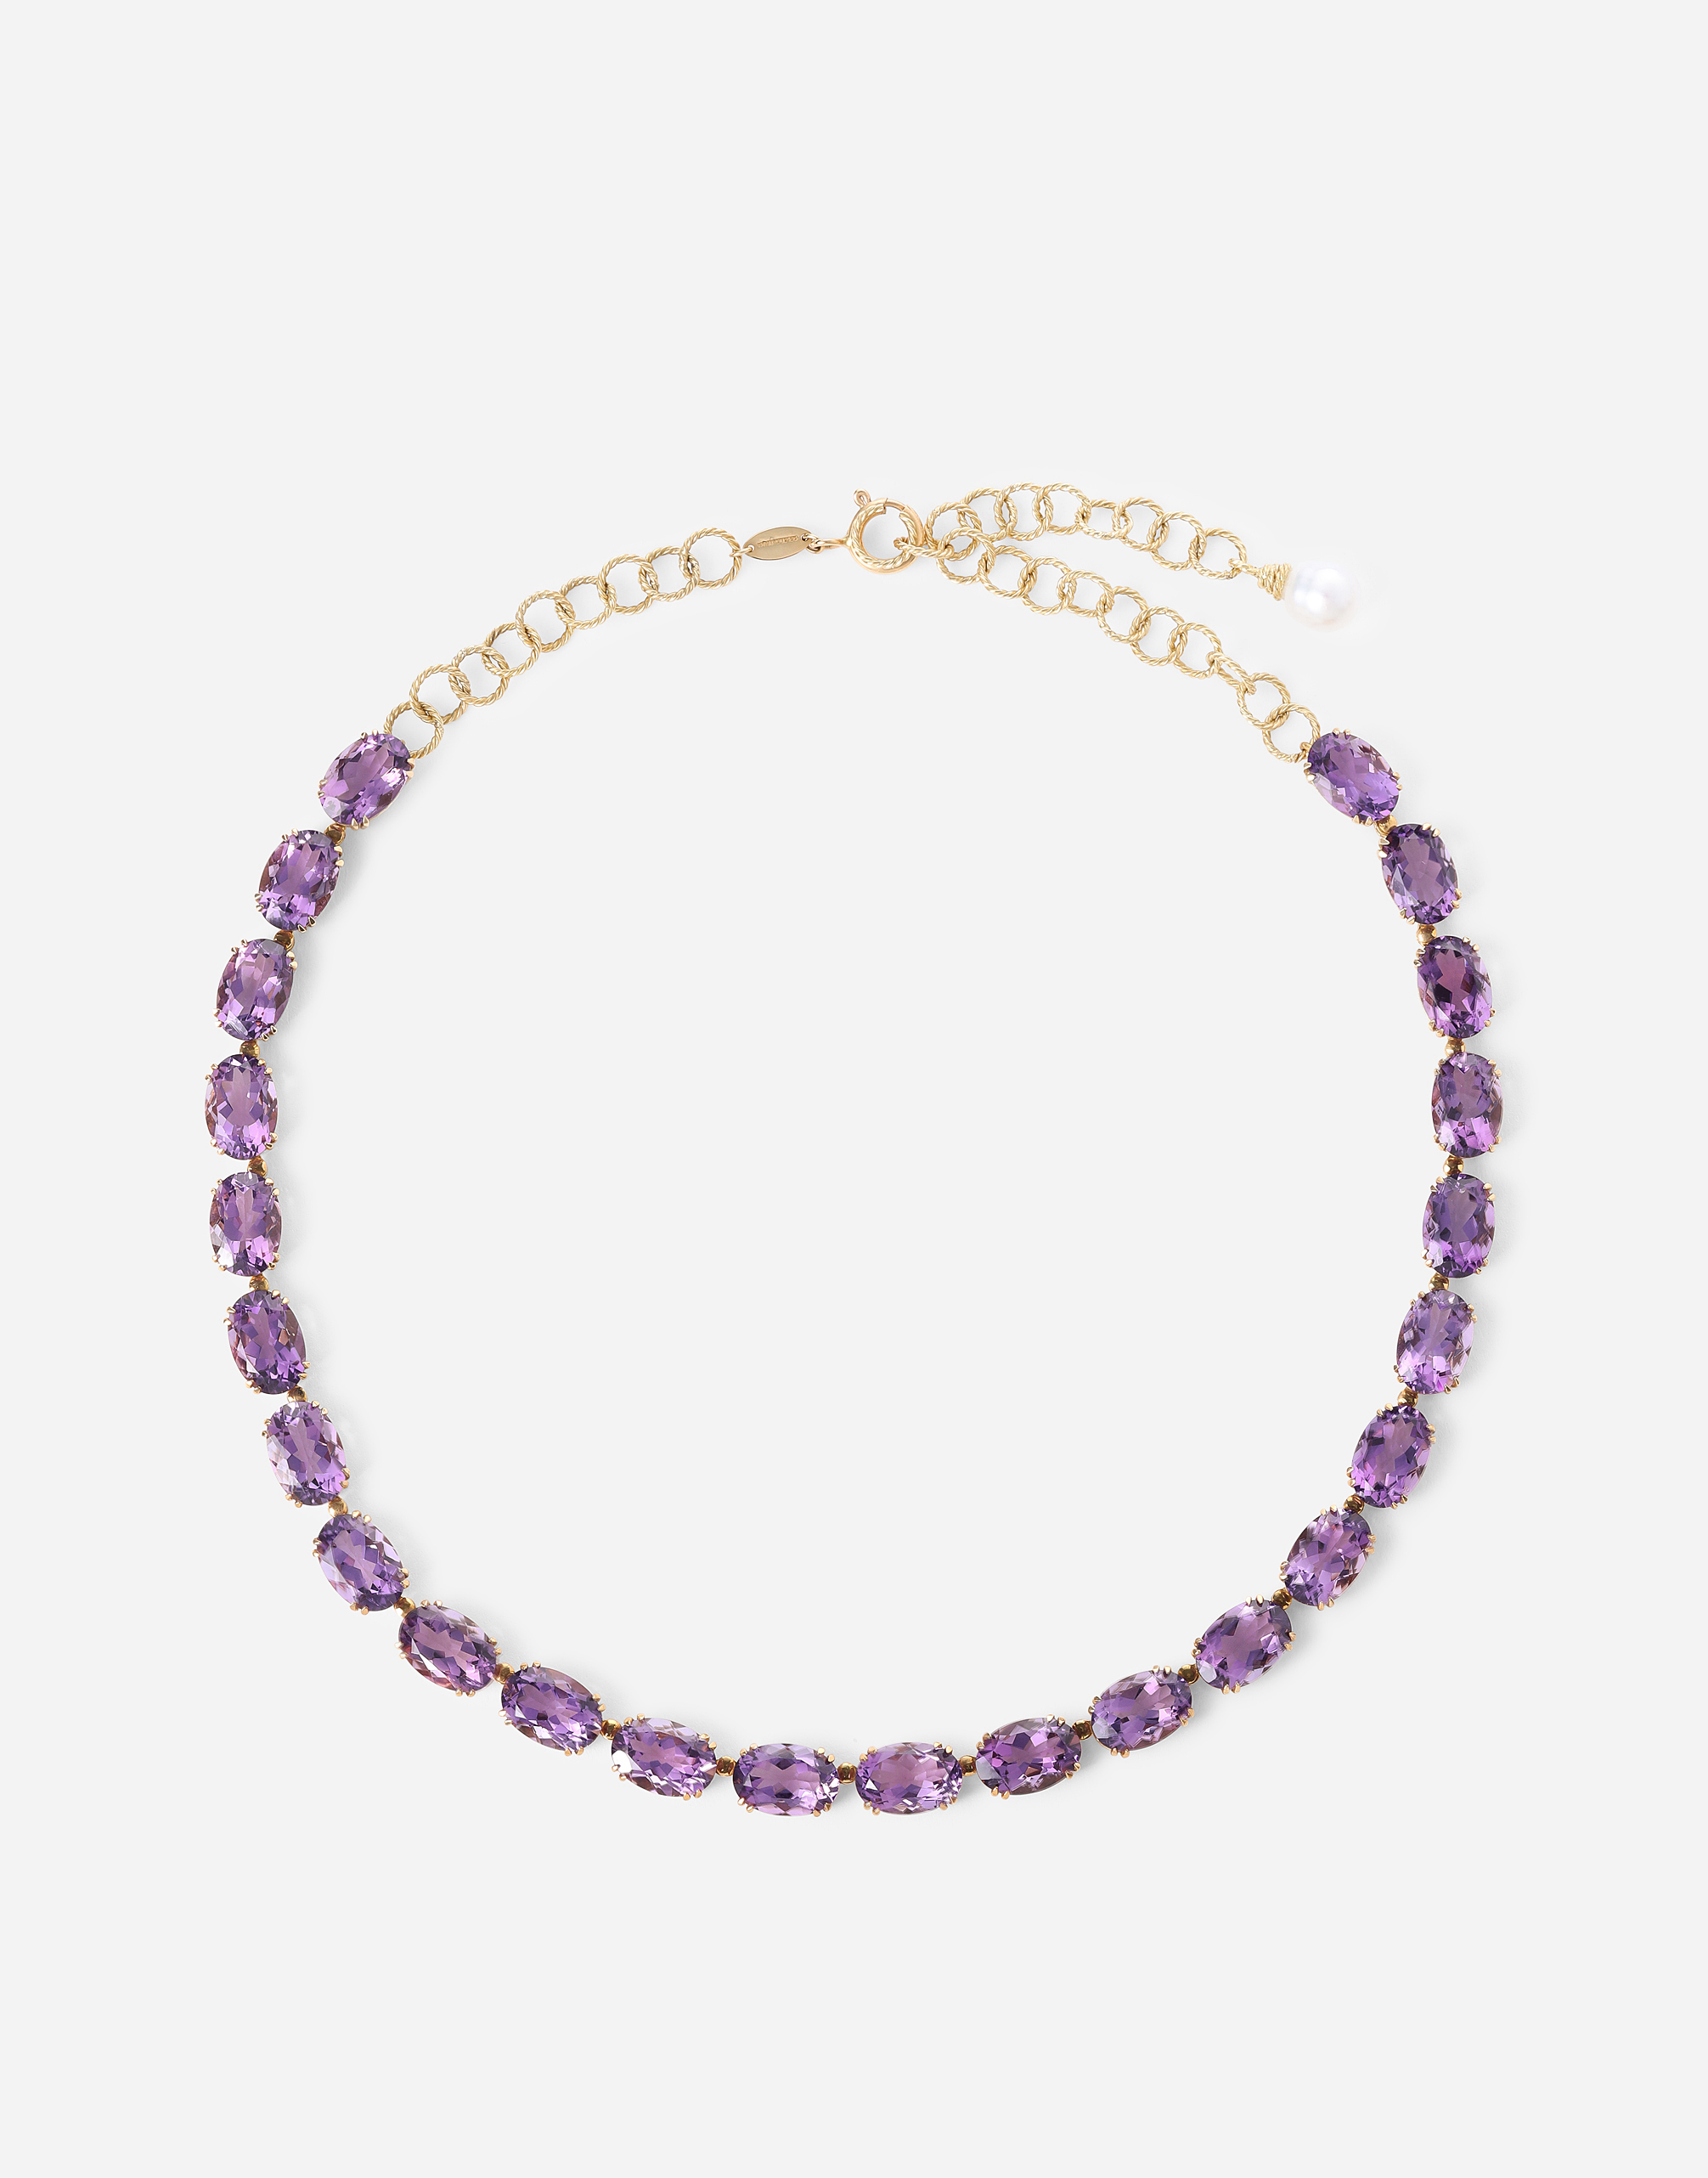 Anna necklace in yellow 18kt gold with amethysts in Gold